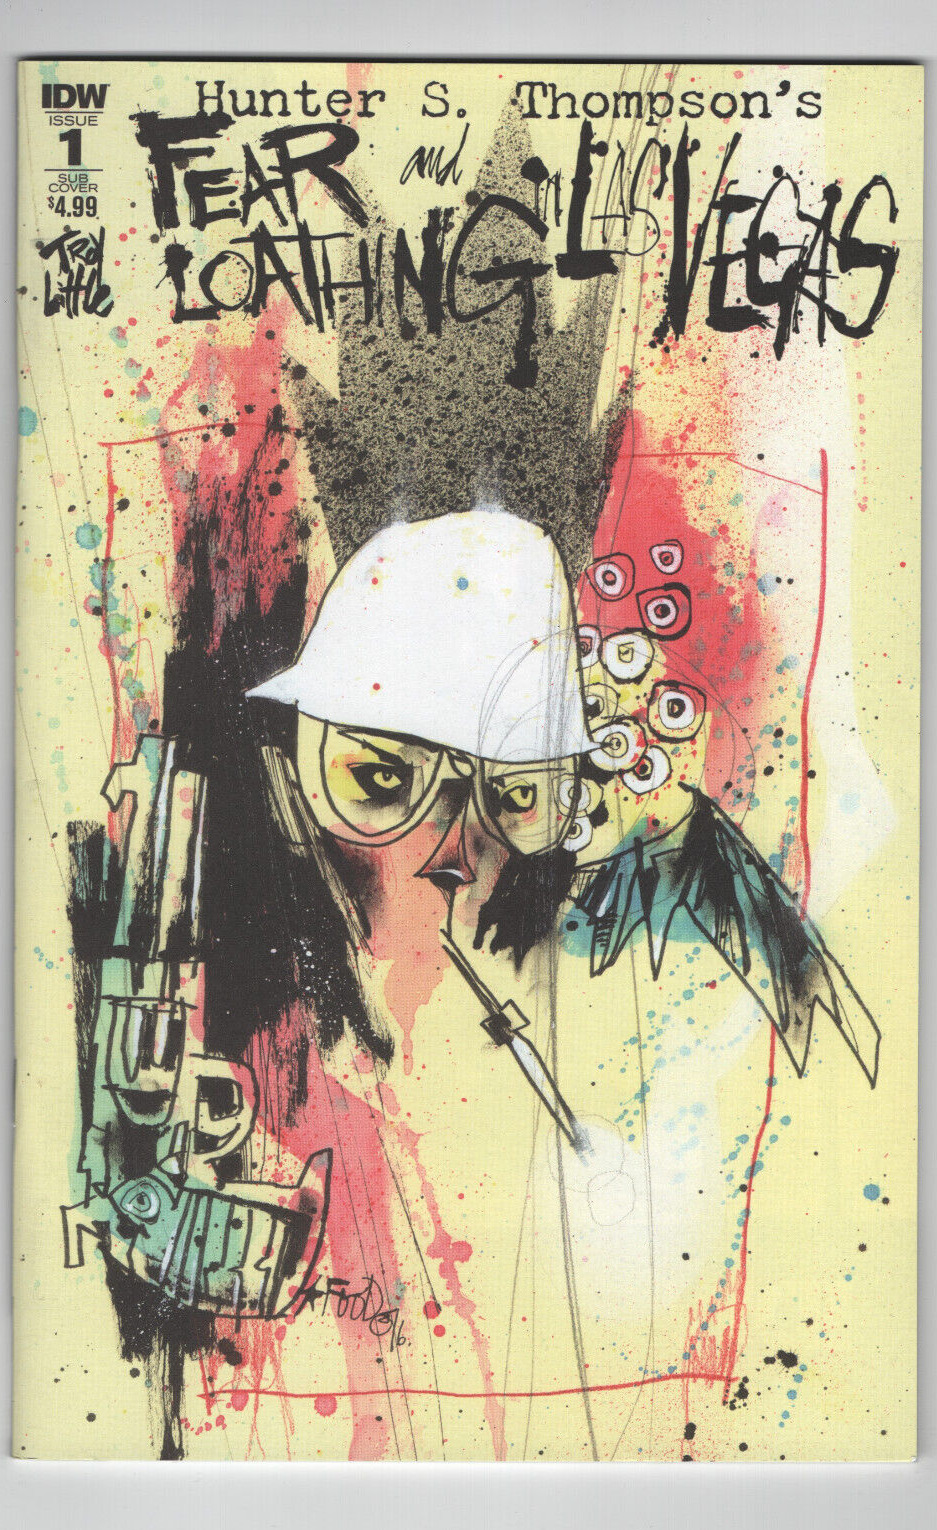 FEAR AND LOATHING IN LAS VEGAS #1 Jim Mahfood Sub Cover Variant IDW Comic 2016